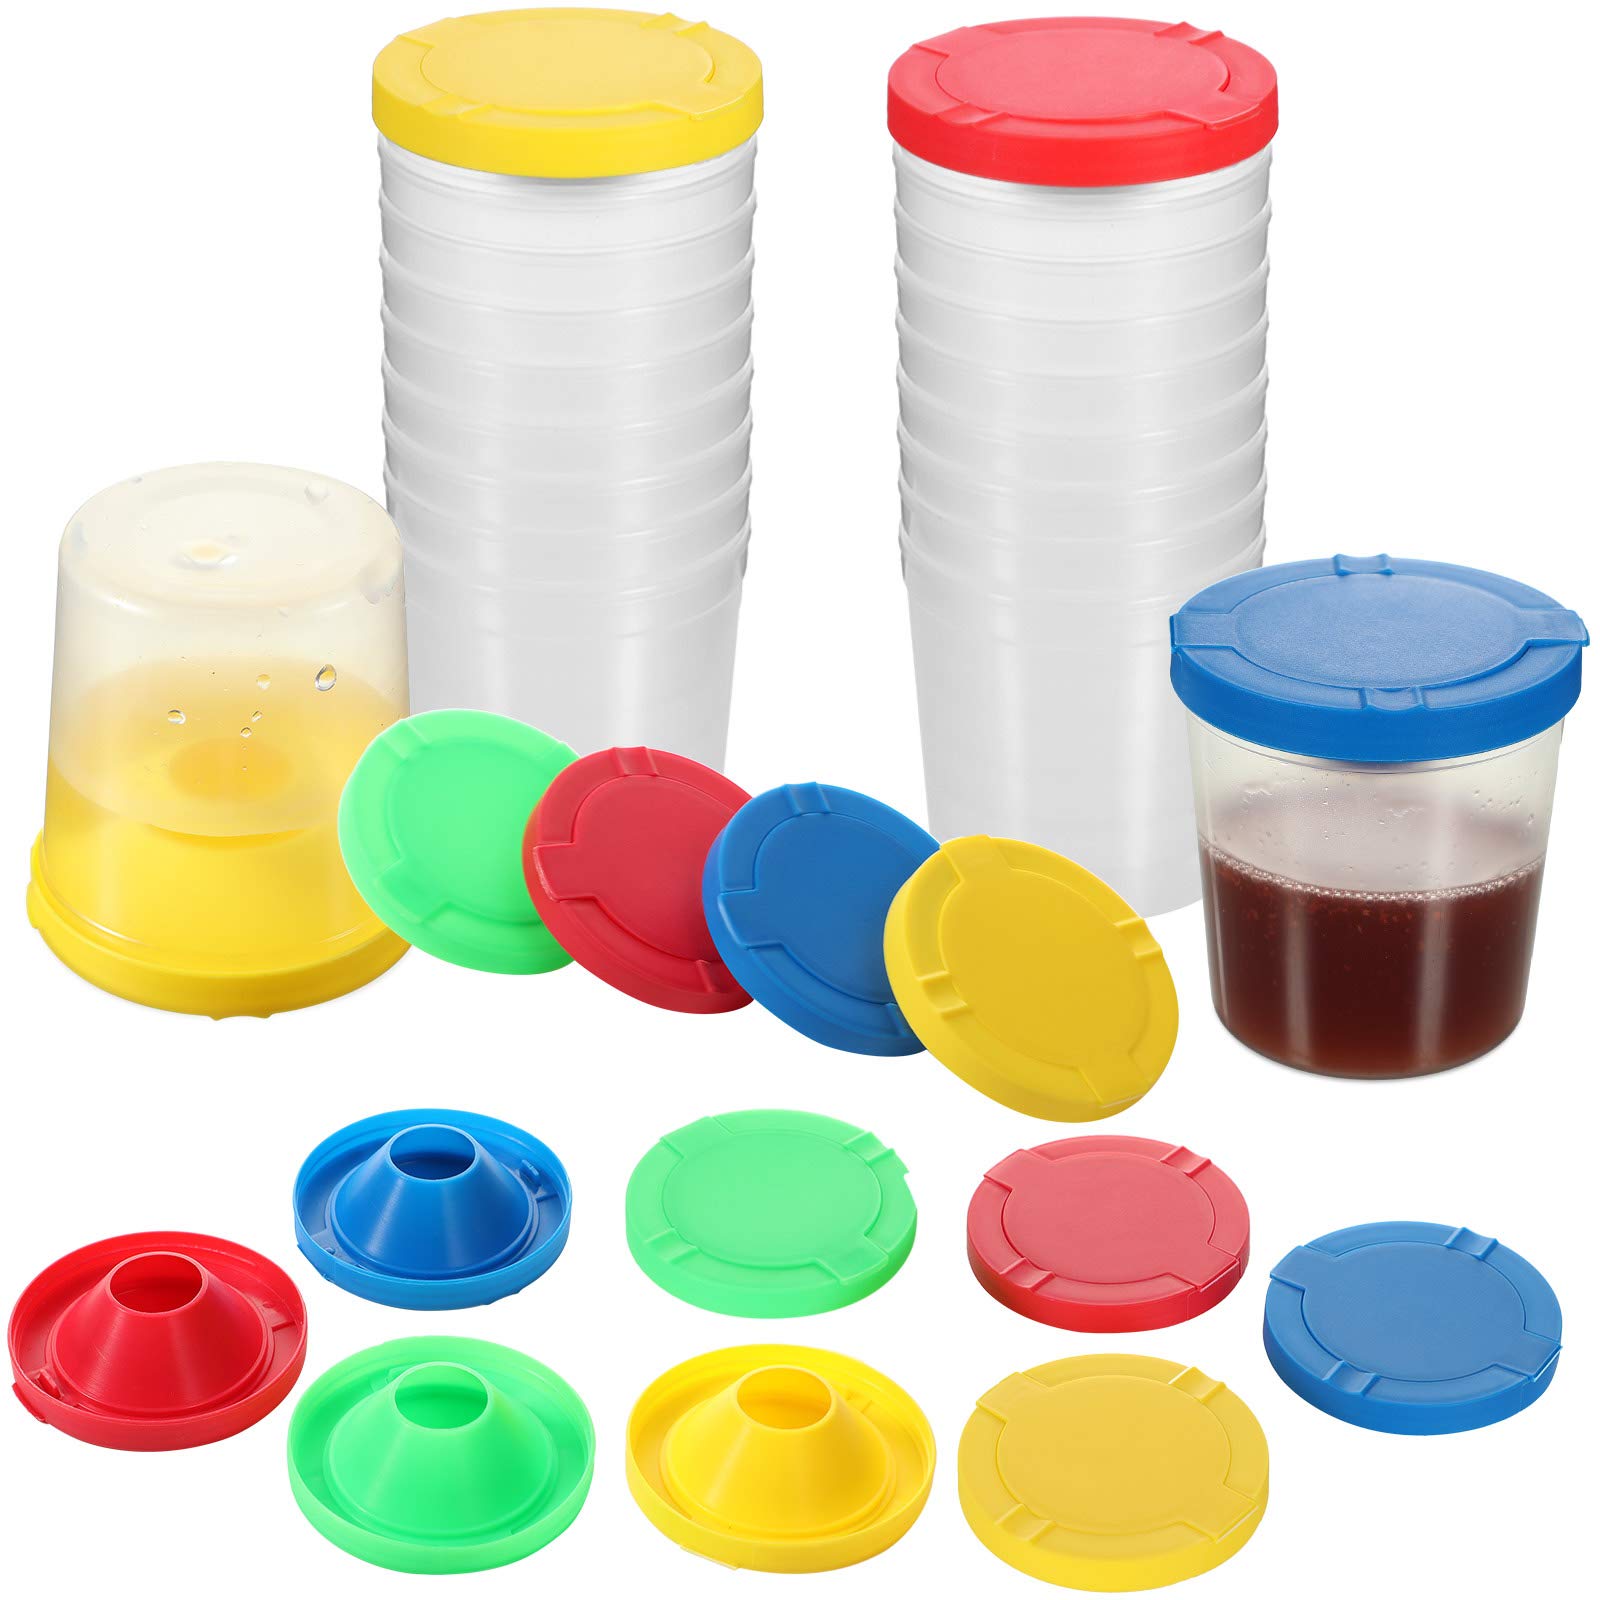 Paint Cups for Kids Non-Spill Paint Cups with Flip Open Lids Set Art Supply  for Kids School Classroom Artist Studio Assorted Colors (24 Pieces)